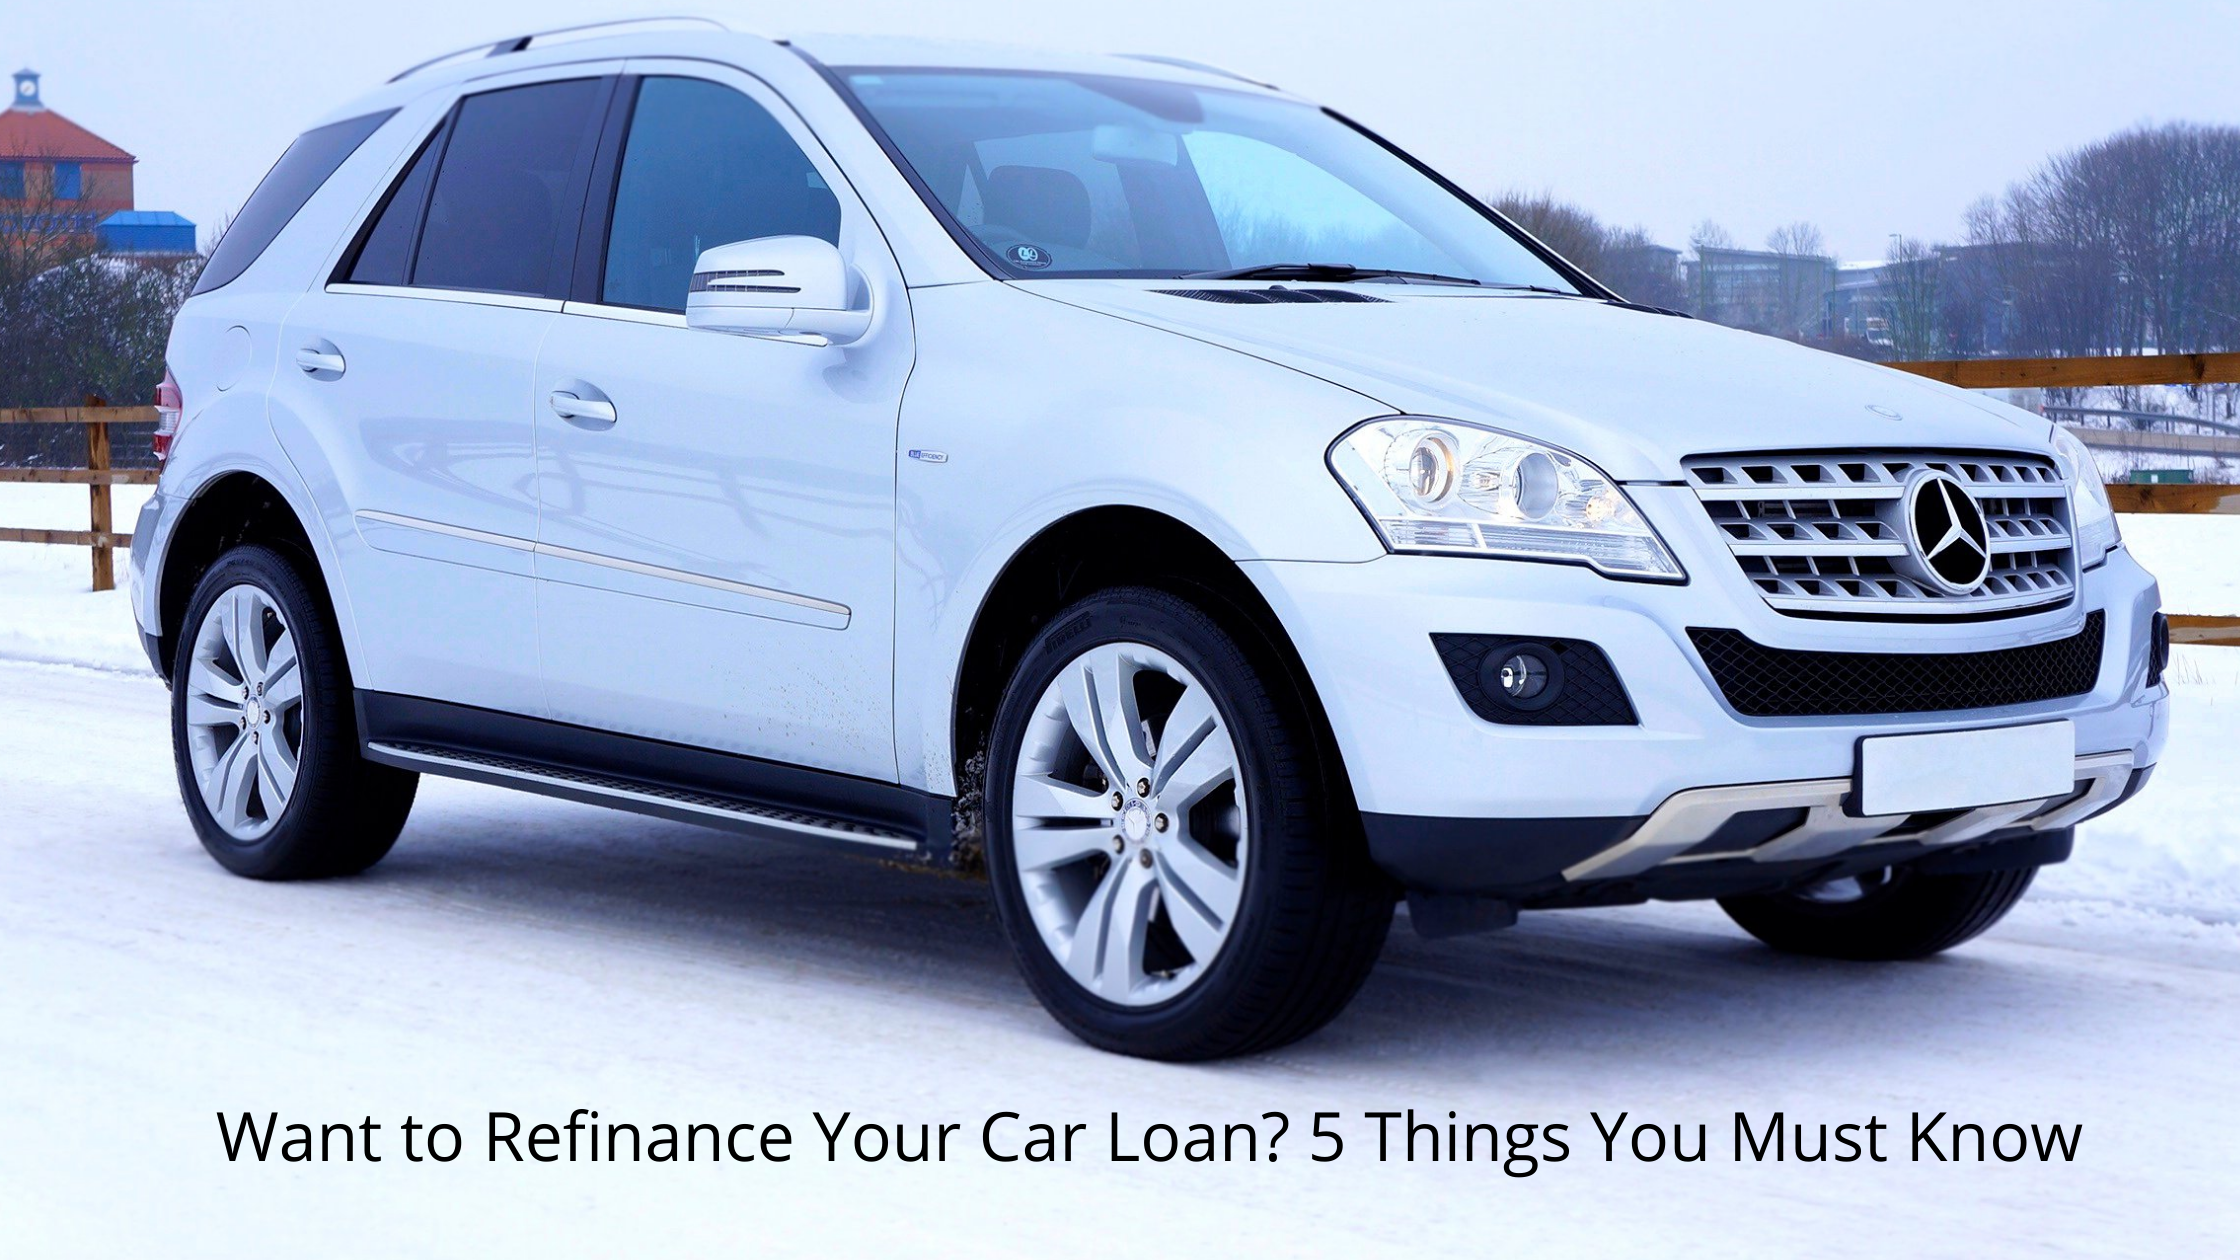 Want to Refinance Your Car Loan? 5 Things You Must Know